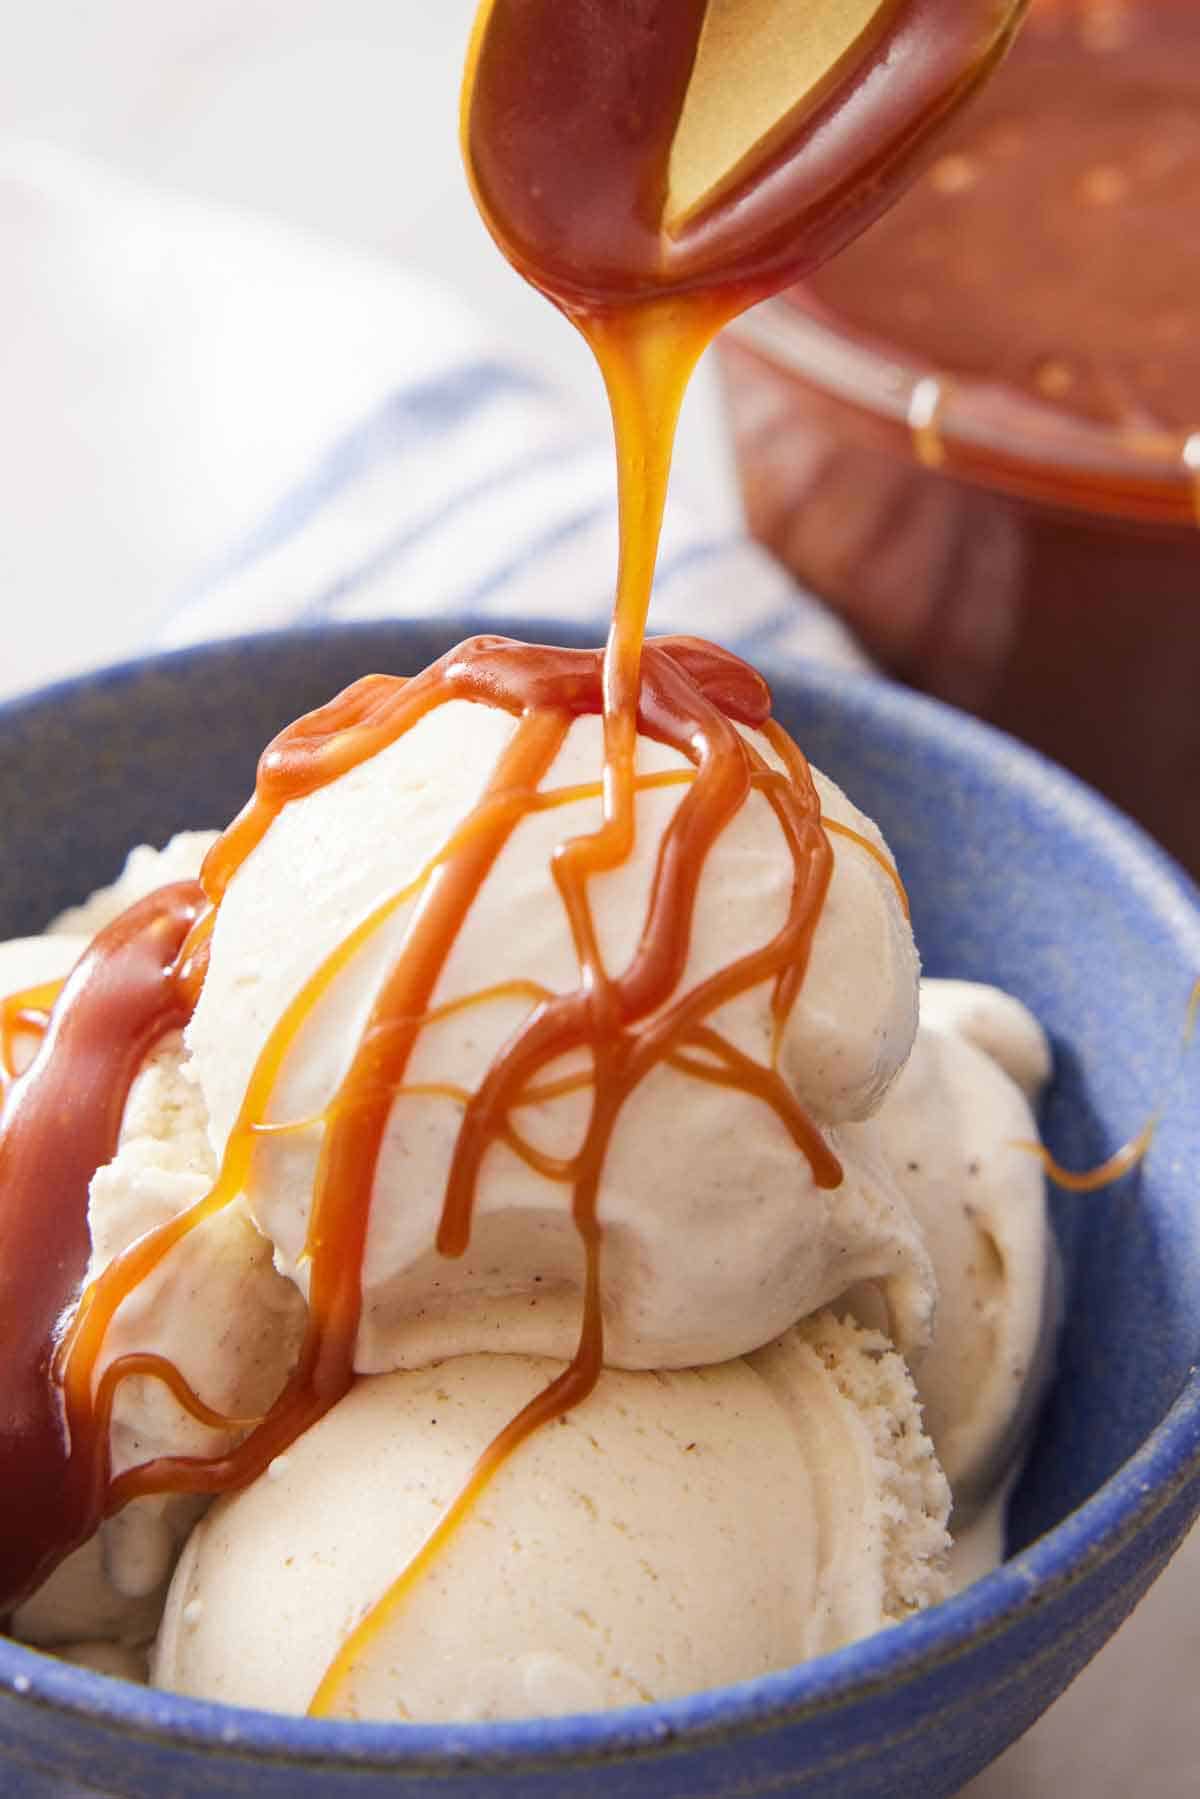 A bowl with scoops of vanilla ice cream with caramel sauce drizzled over top.